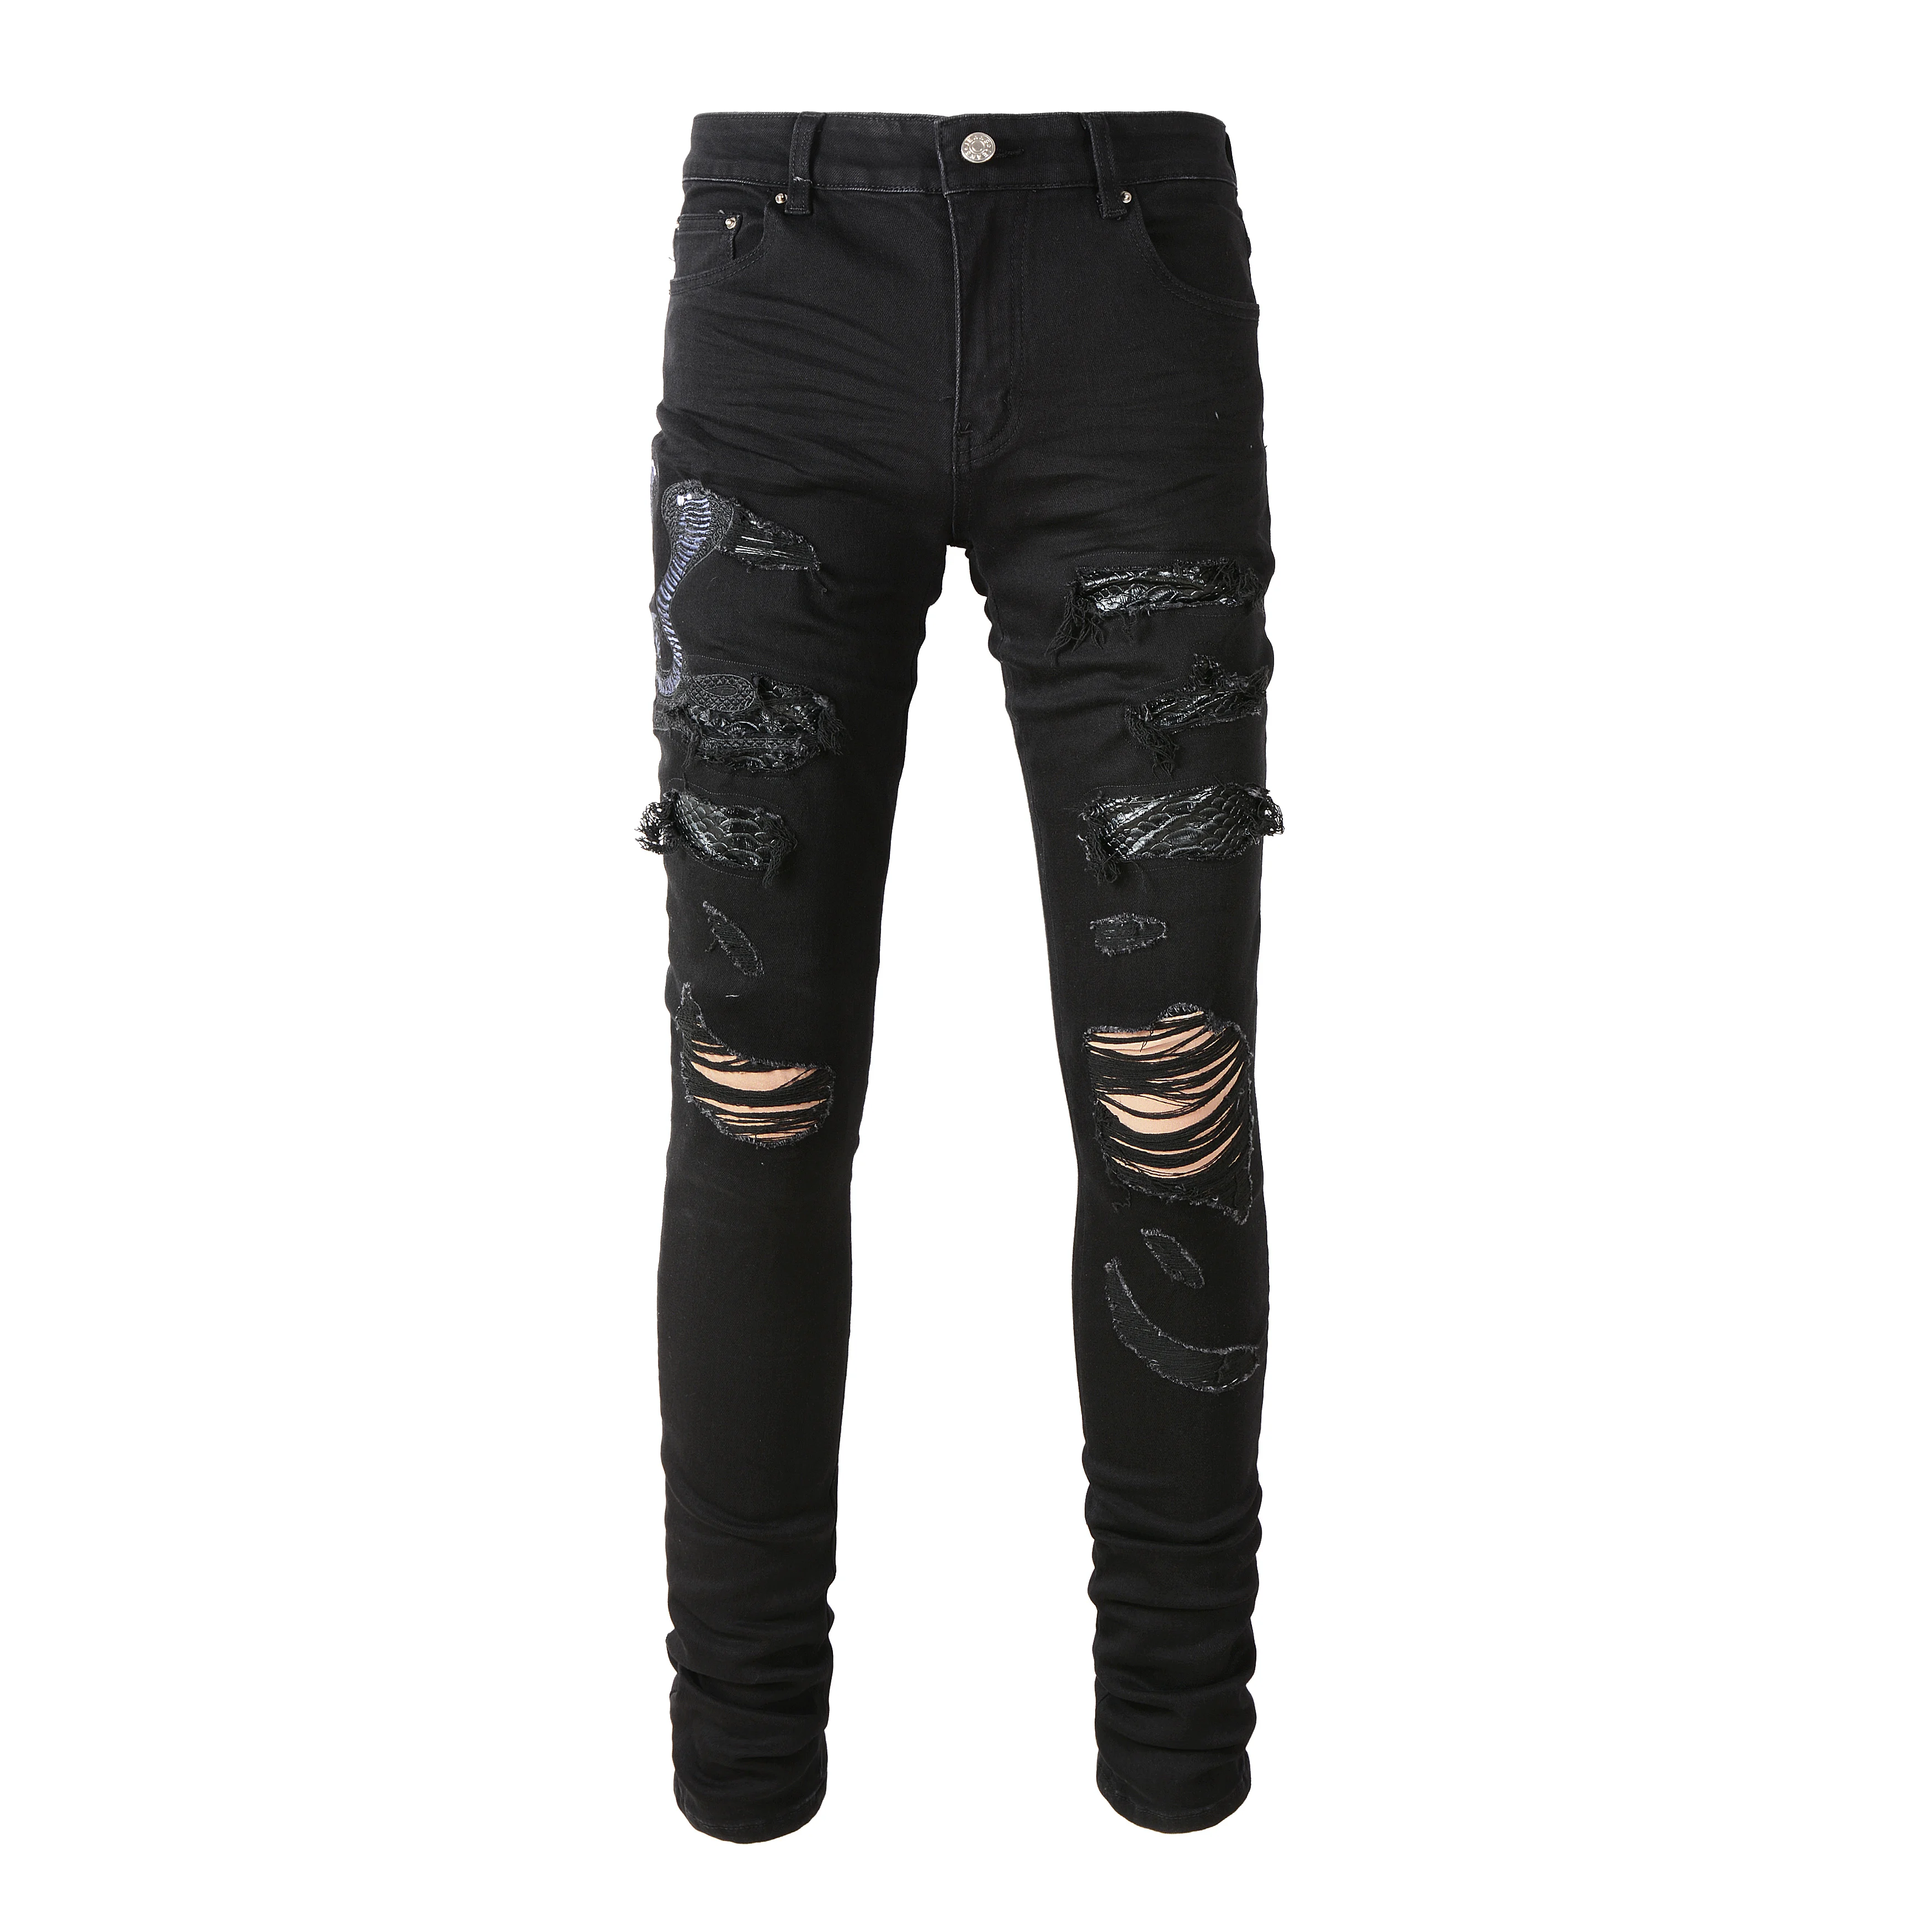 

Rts For Dropshipping 8560 Damaged Distressed Men's Jeans Slim Ripped Jeans For Dropshipping Men Vintage Embroidery Men Jeans